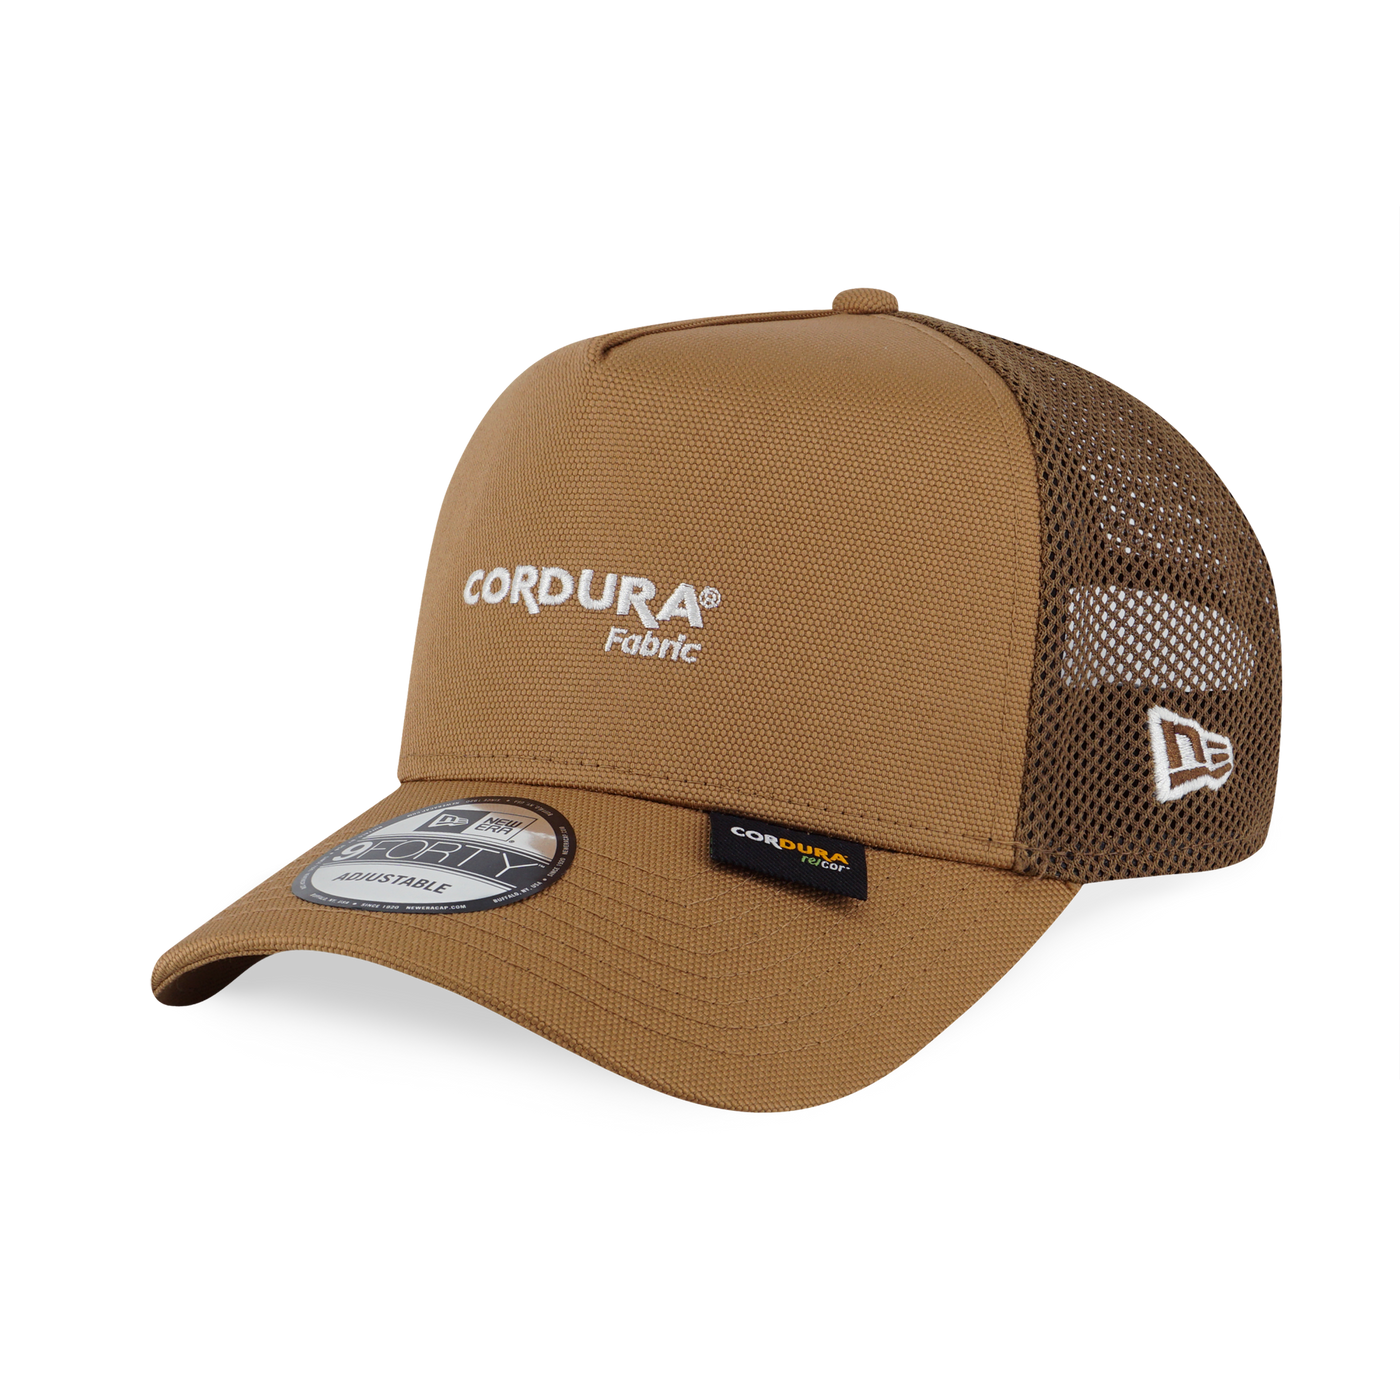 NEW ERA EARTH DAY - CORDURA RE/COR CAMEL SUEDE 9FORTY AF TRUCKER CAP